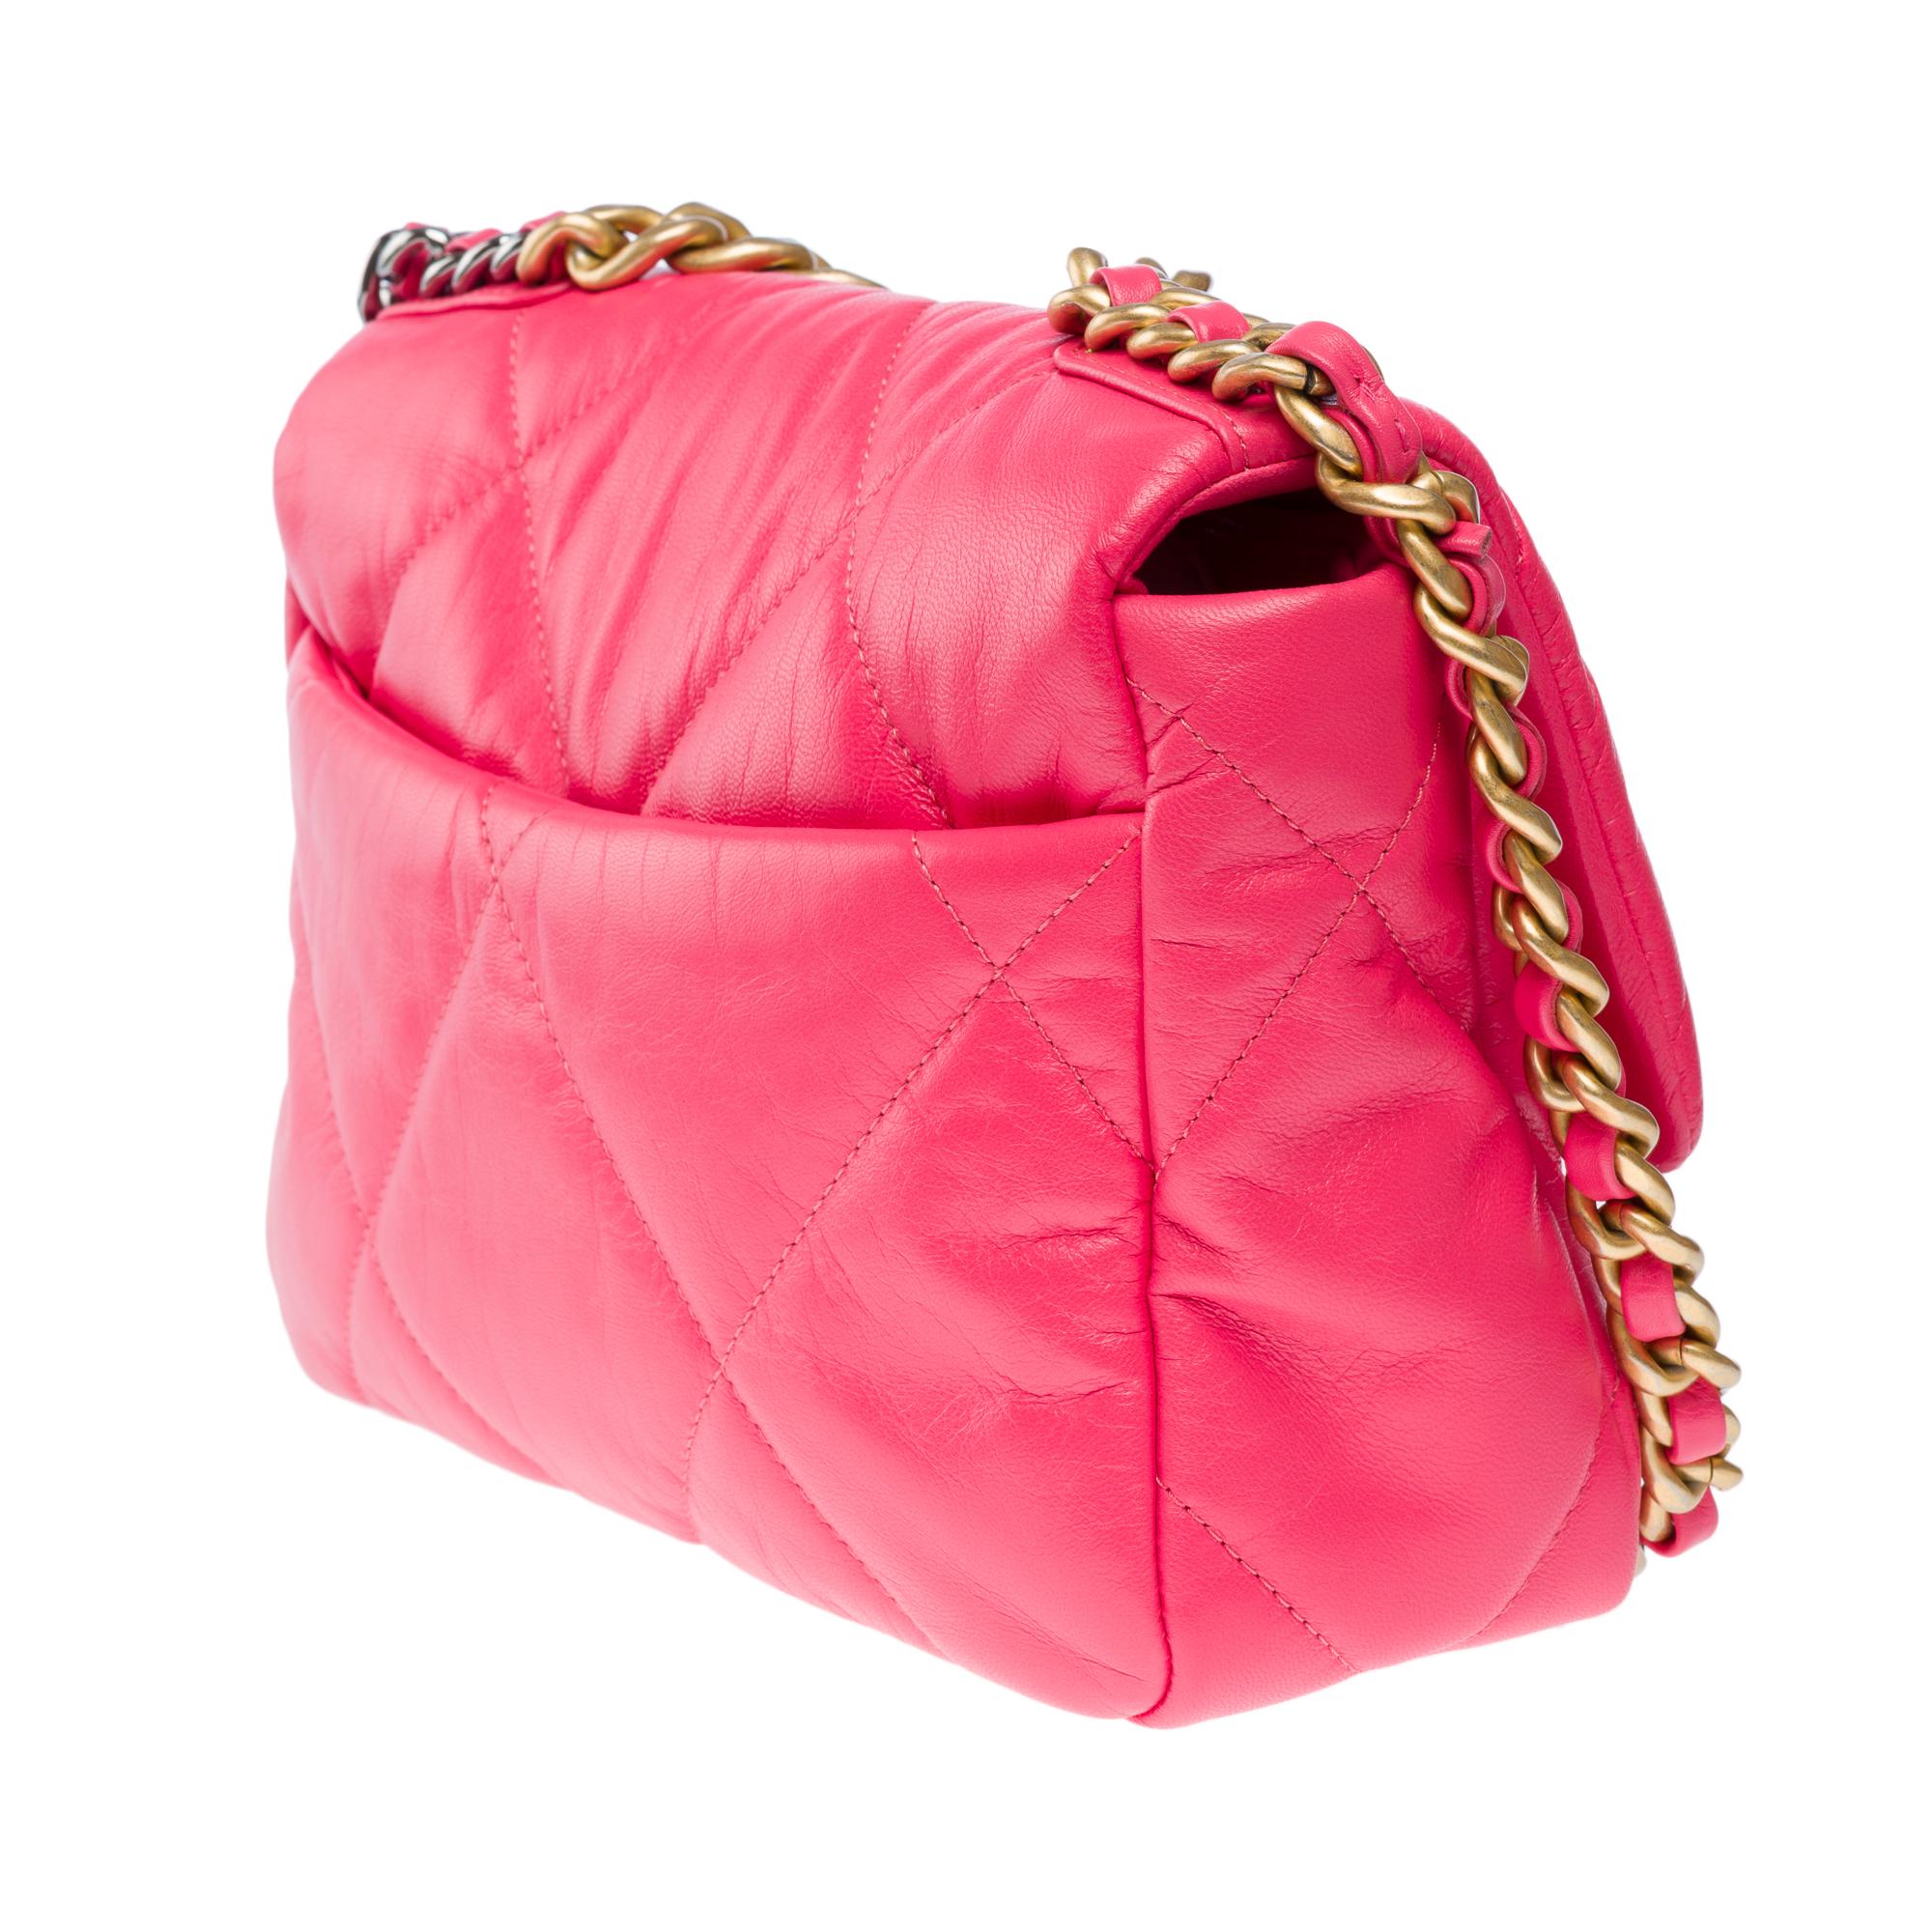 Stunning Chanel 19 shoulder bag in Pink quilted leather , Matt gold and SHW 3